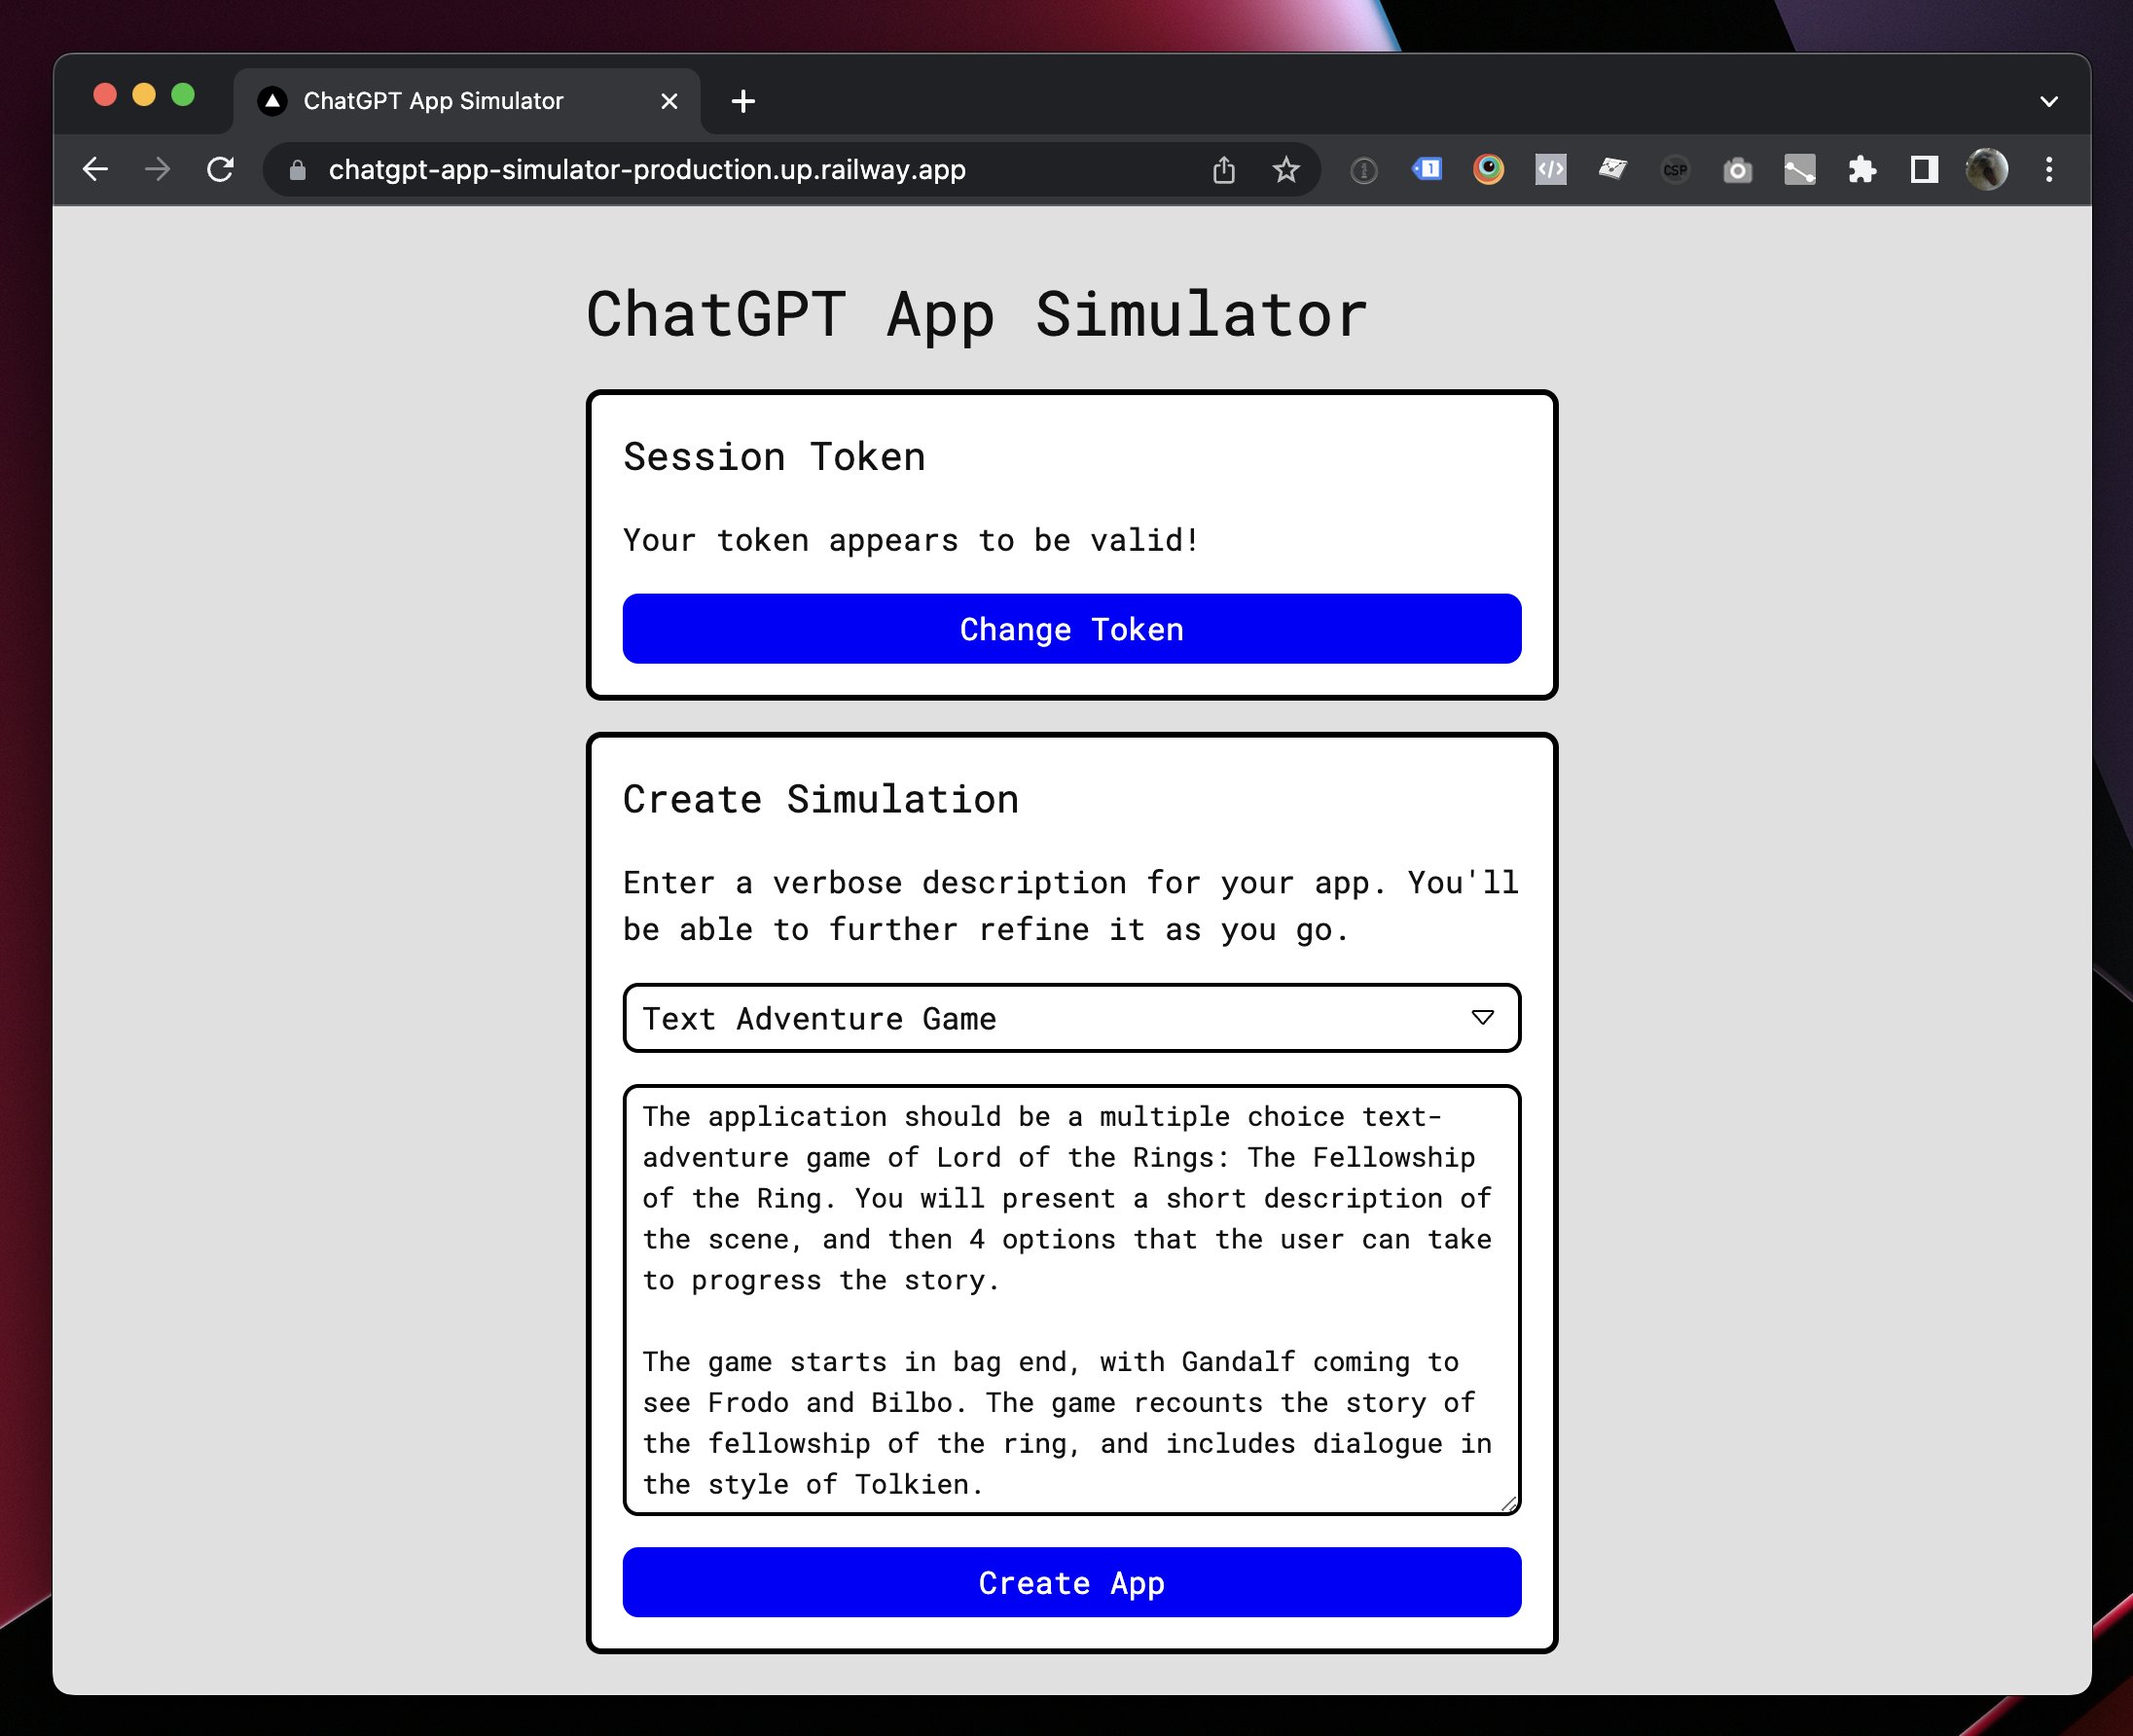 Creating a Text Adventure Game with ChatGPT